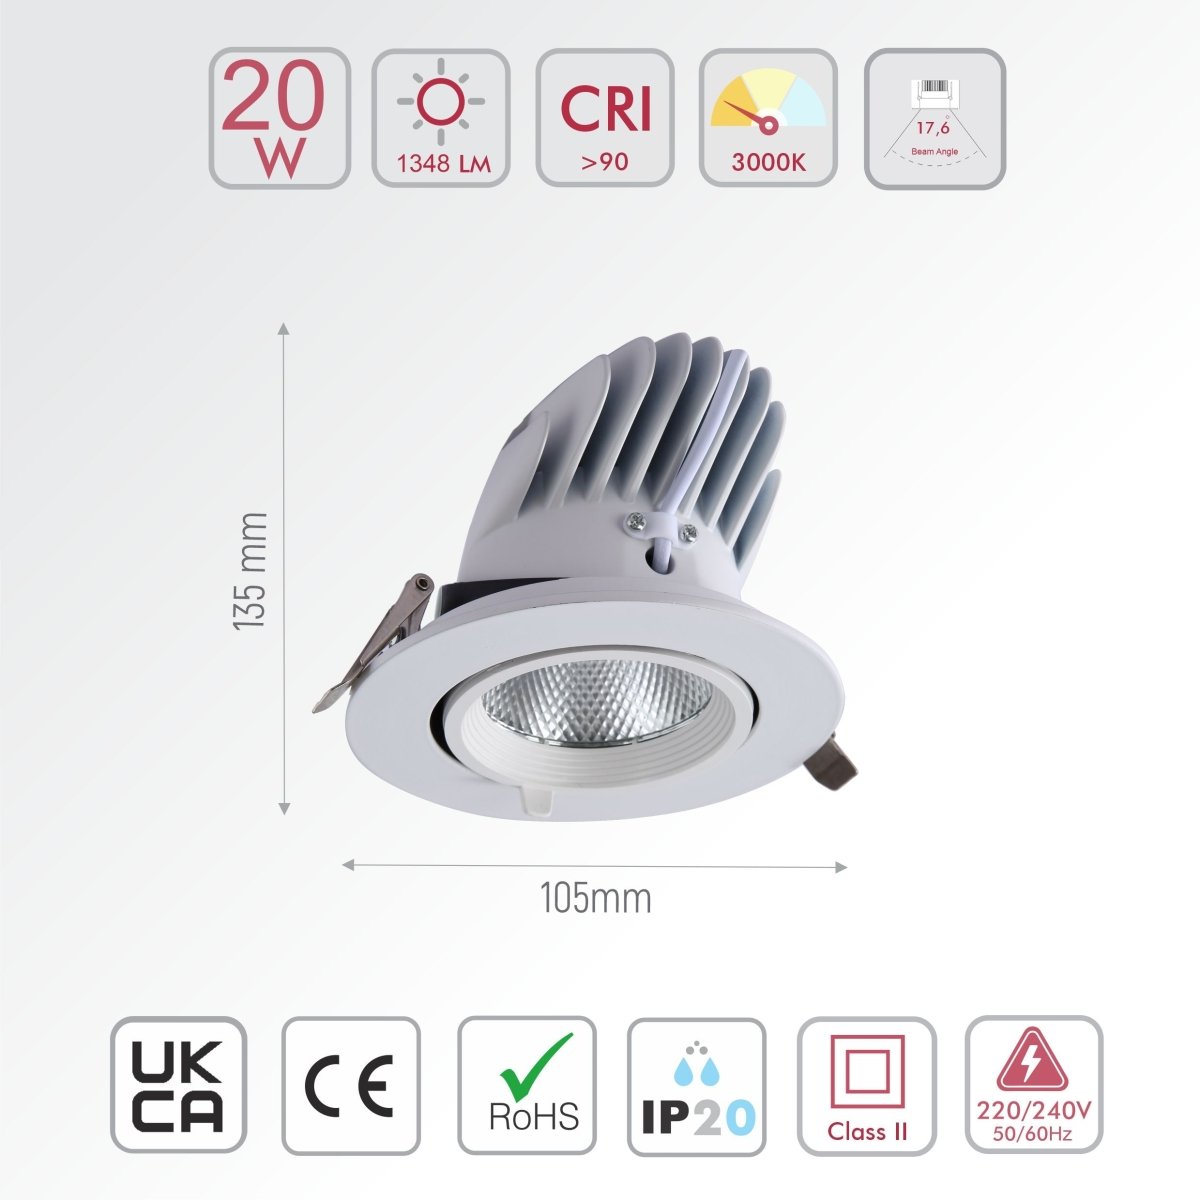 Size and specs of LED Accent Performance Swivel and Scoop Downlight 10W 20W 30W Warm White Cool White Cool Daylight CRI90 White | TEKLED warm 20w